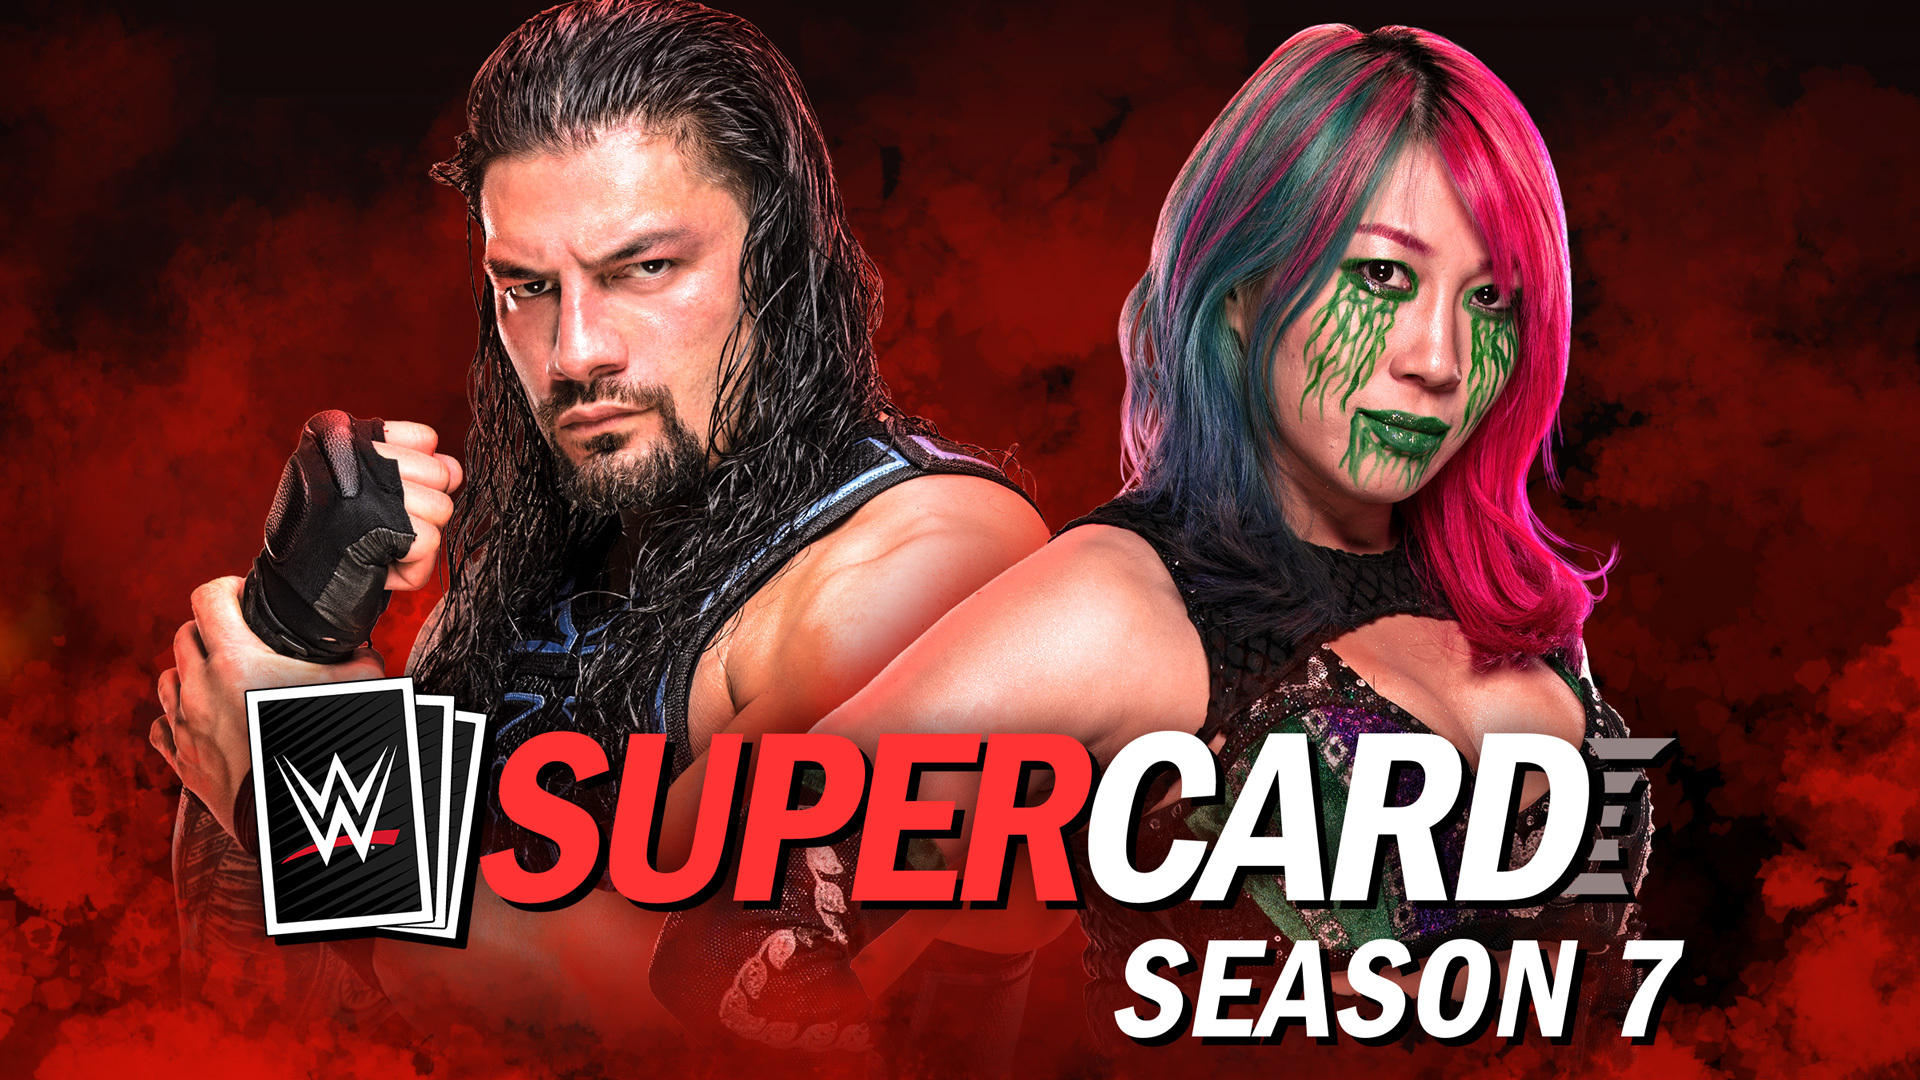 WWE® SUPERCARD SEASON 7 INTRODUCES THREE RING CHAOS WITH NEW WARGAMES EVENT